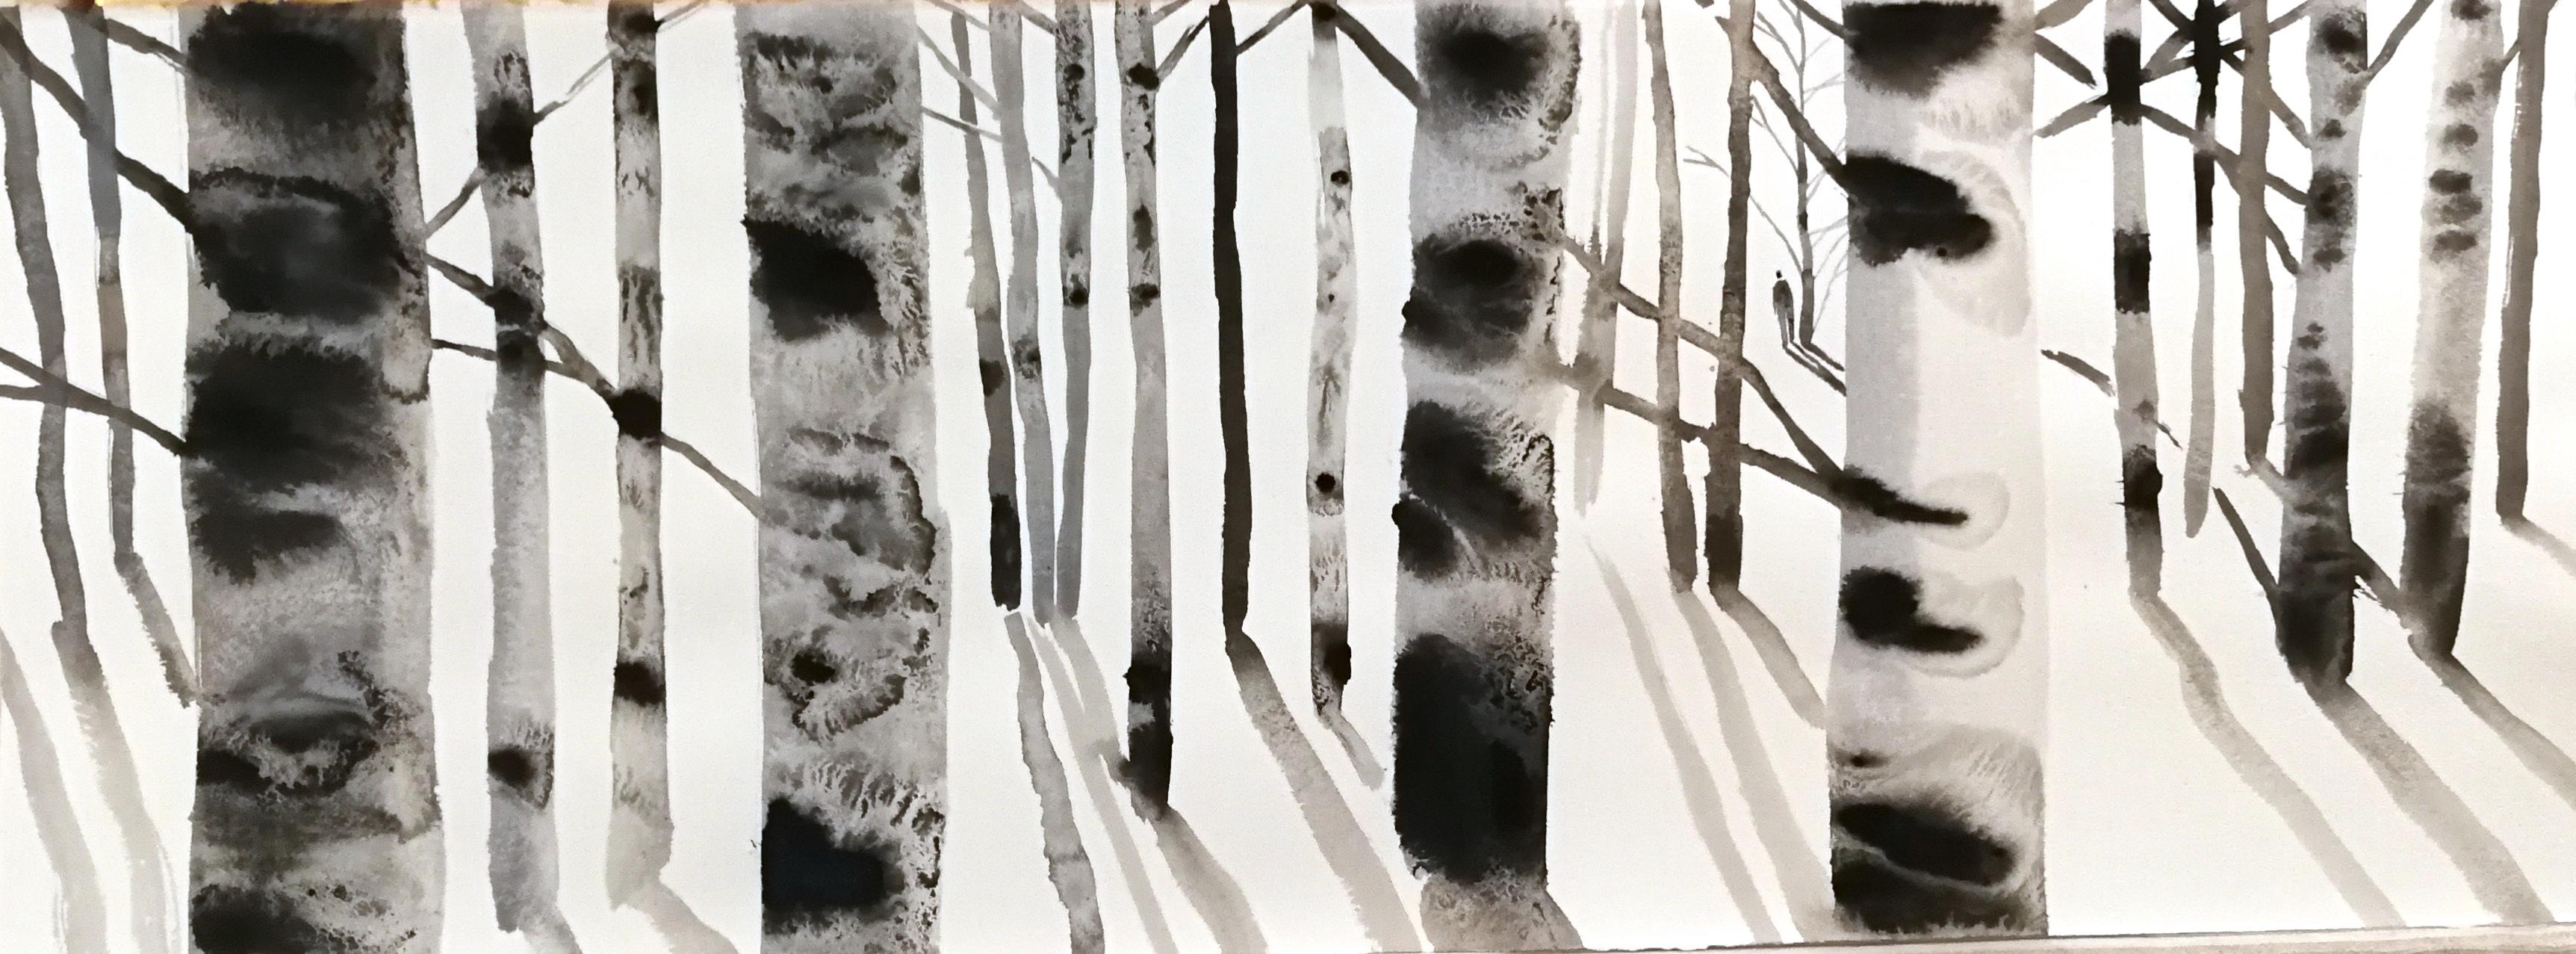 Nicola Magrin Landscape Painting - snowy black and white forest landscape by master italian watercolorist